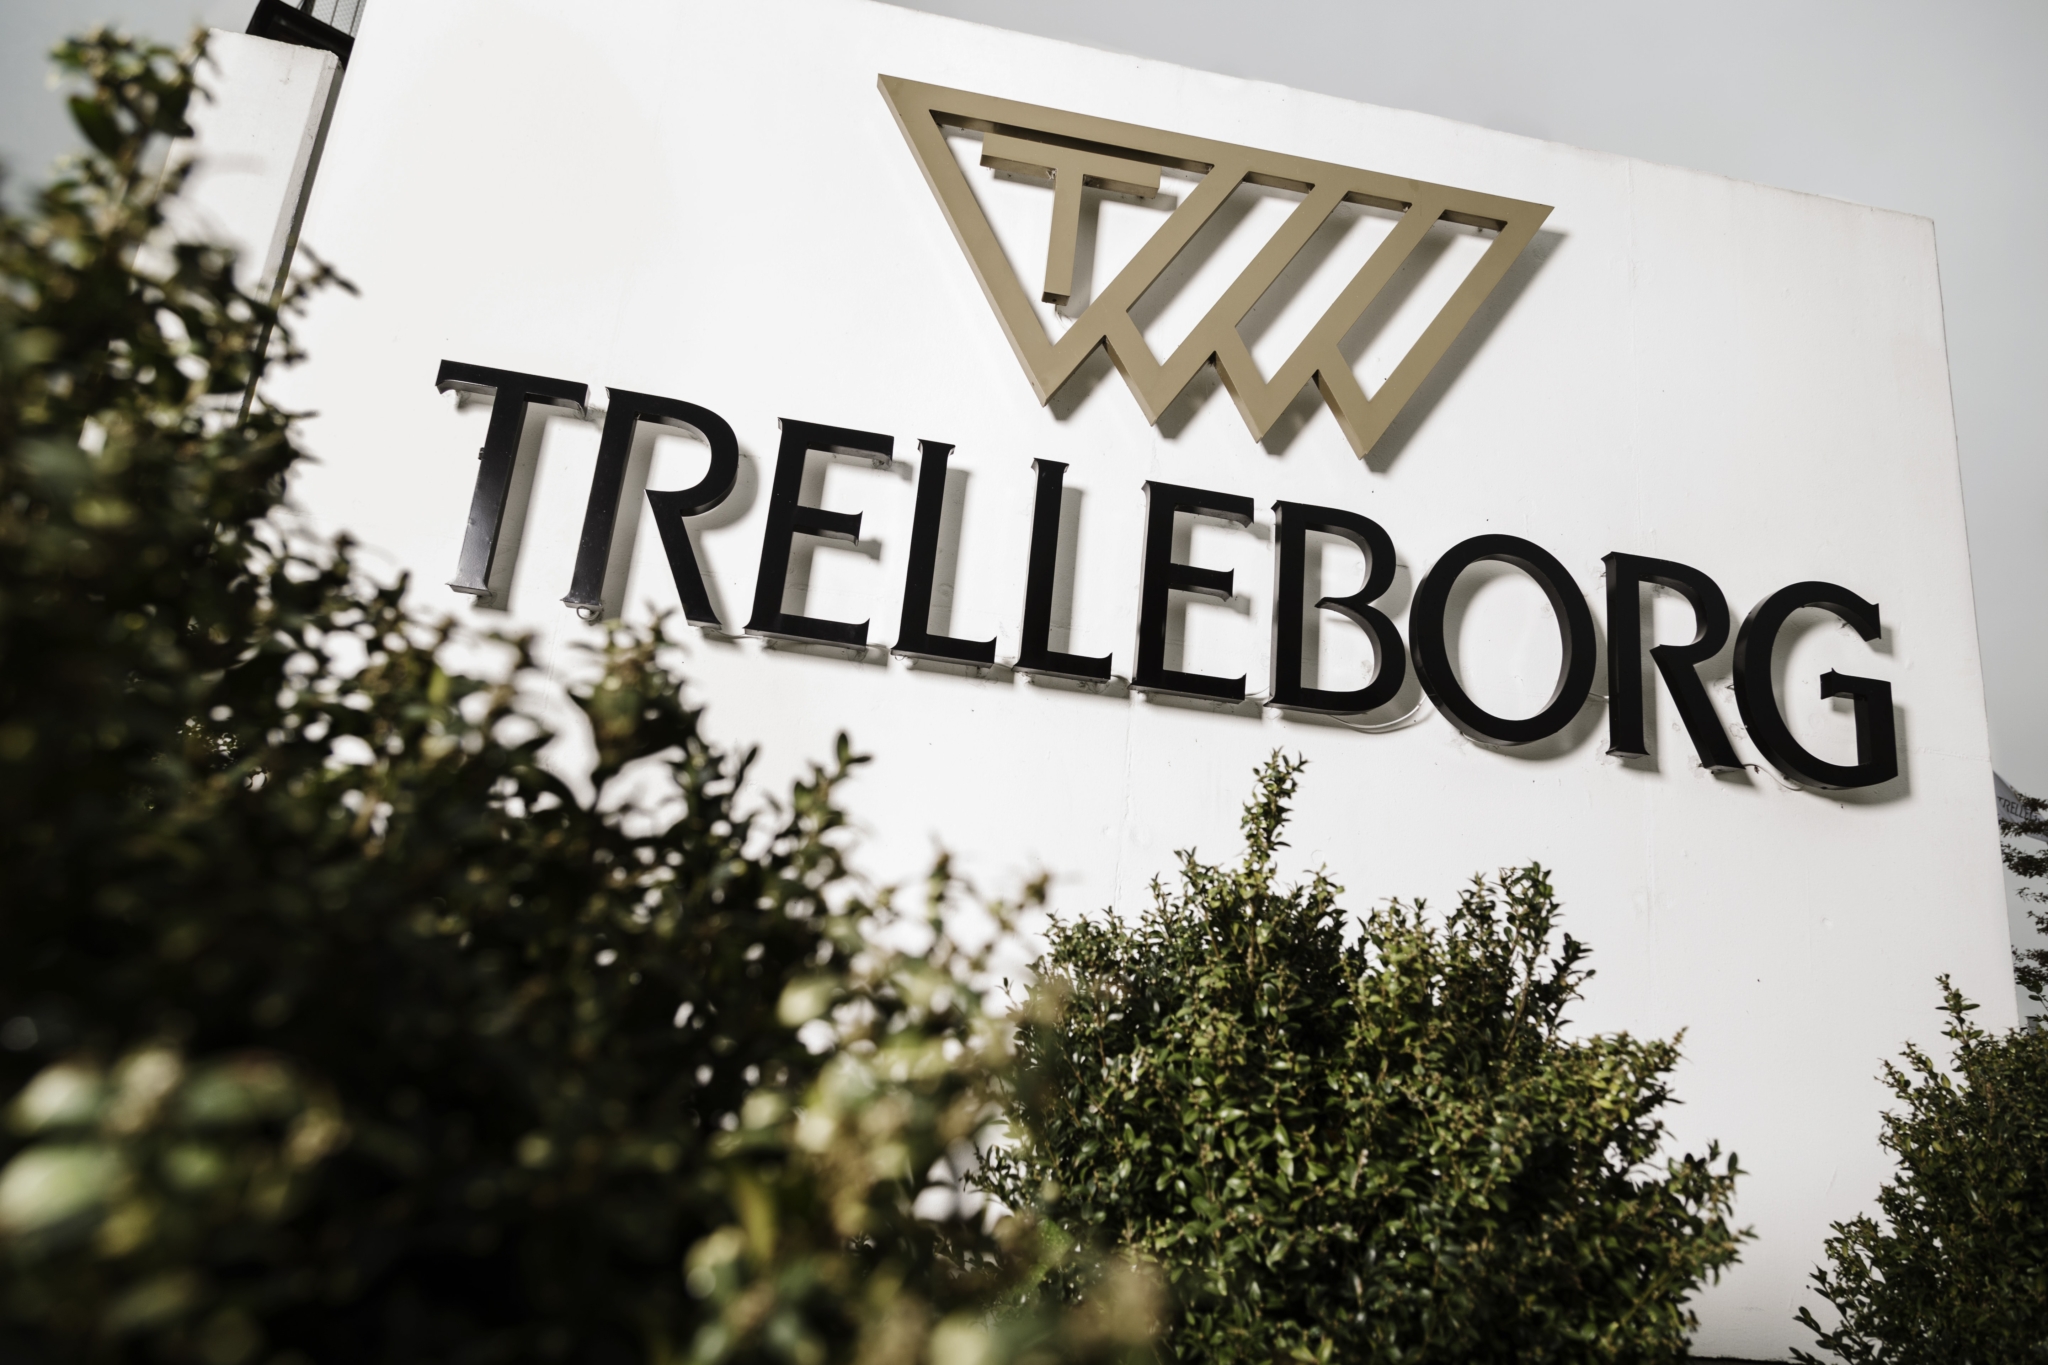 Trelleborg Wheel Systems sale likely to close in May